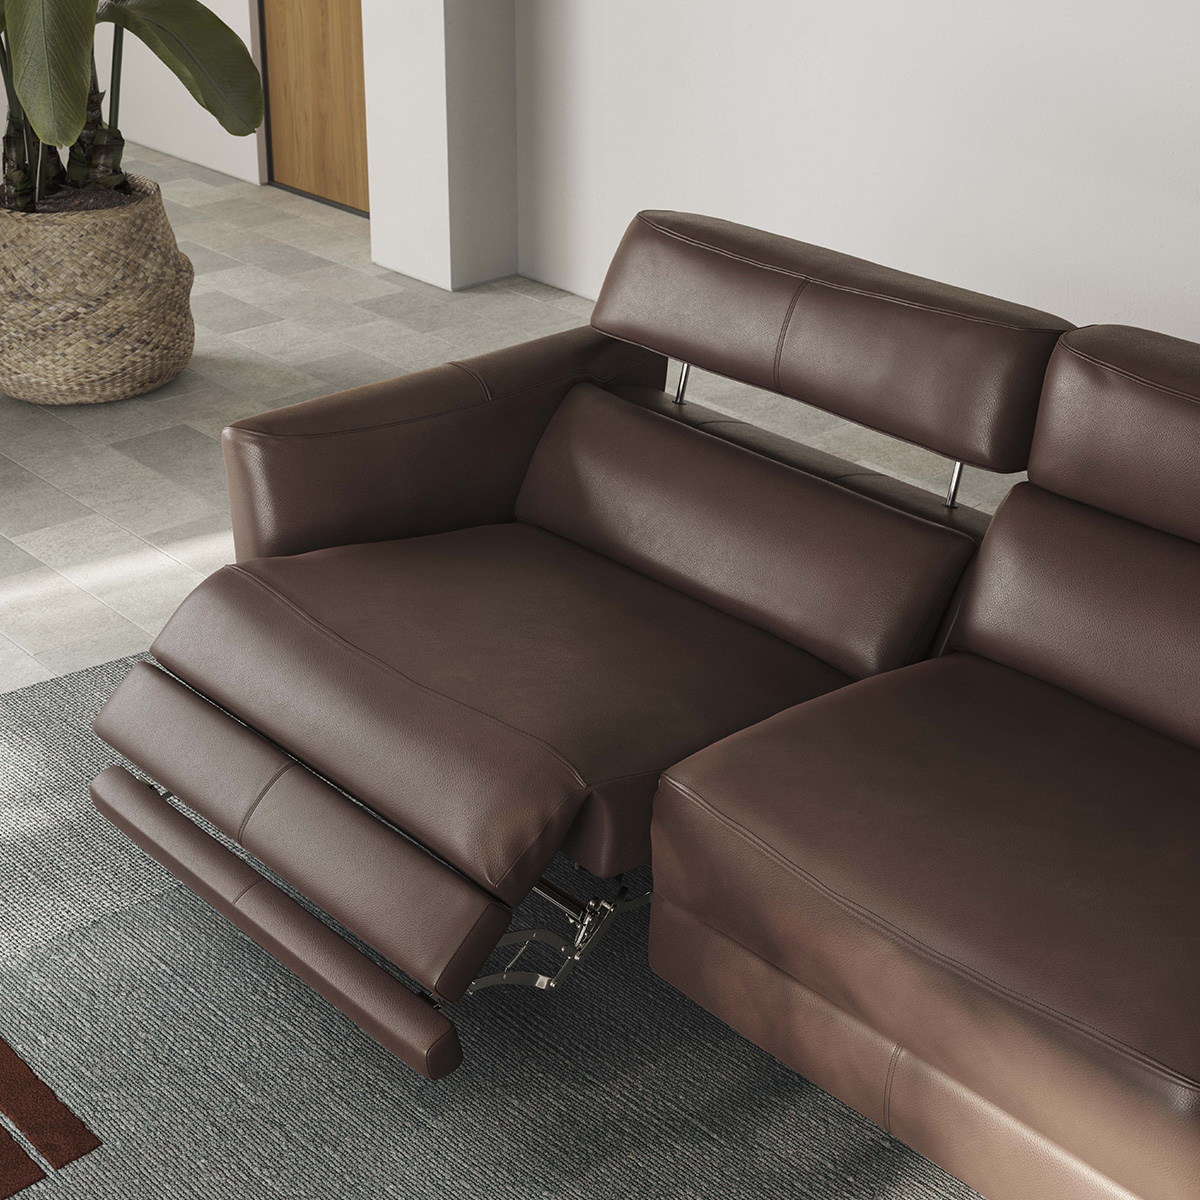 Natuzzi editorial - Fonctions relax